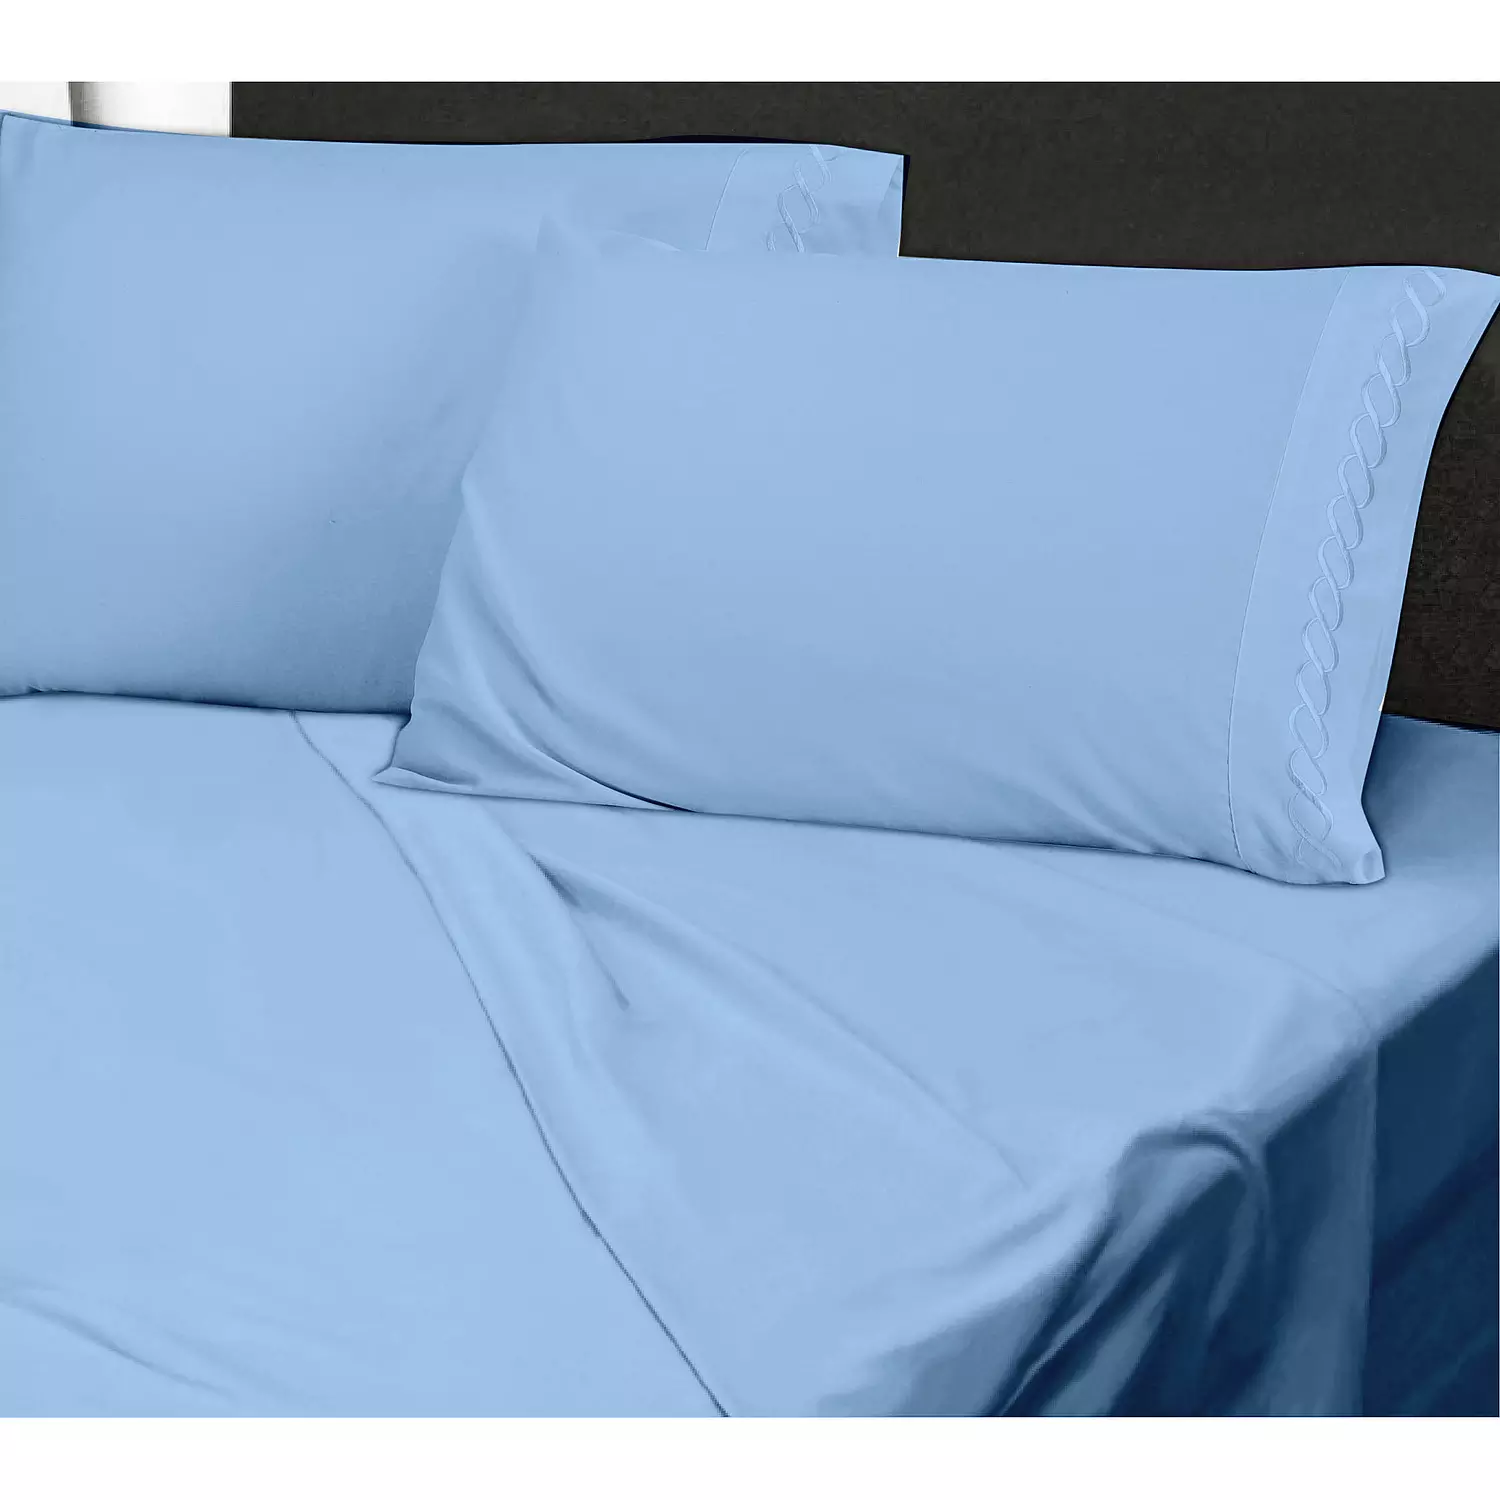 Mercure, sheet set with embroided helix detail, queen, cerulean